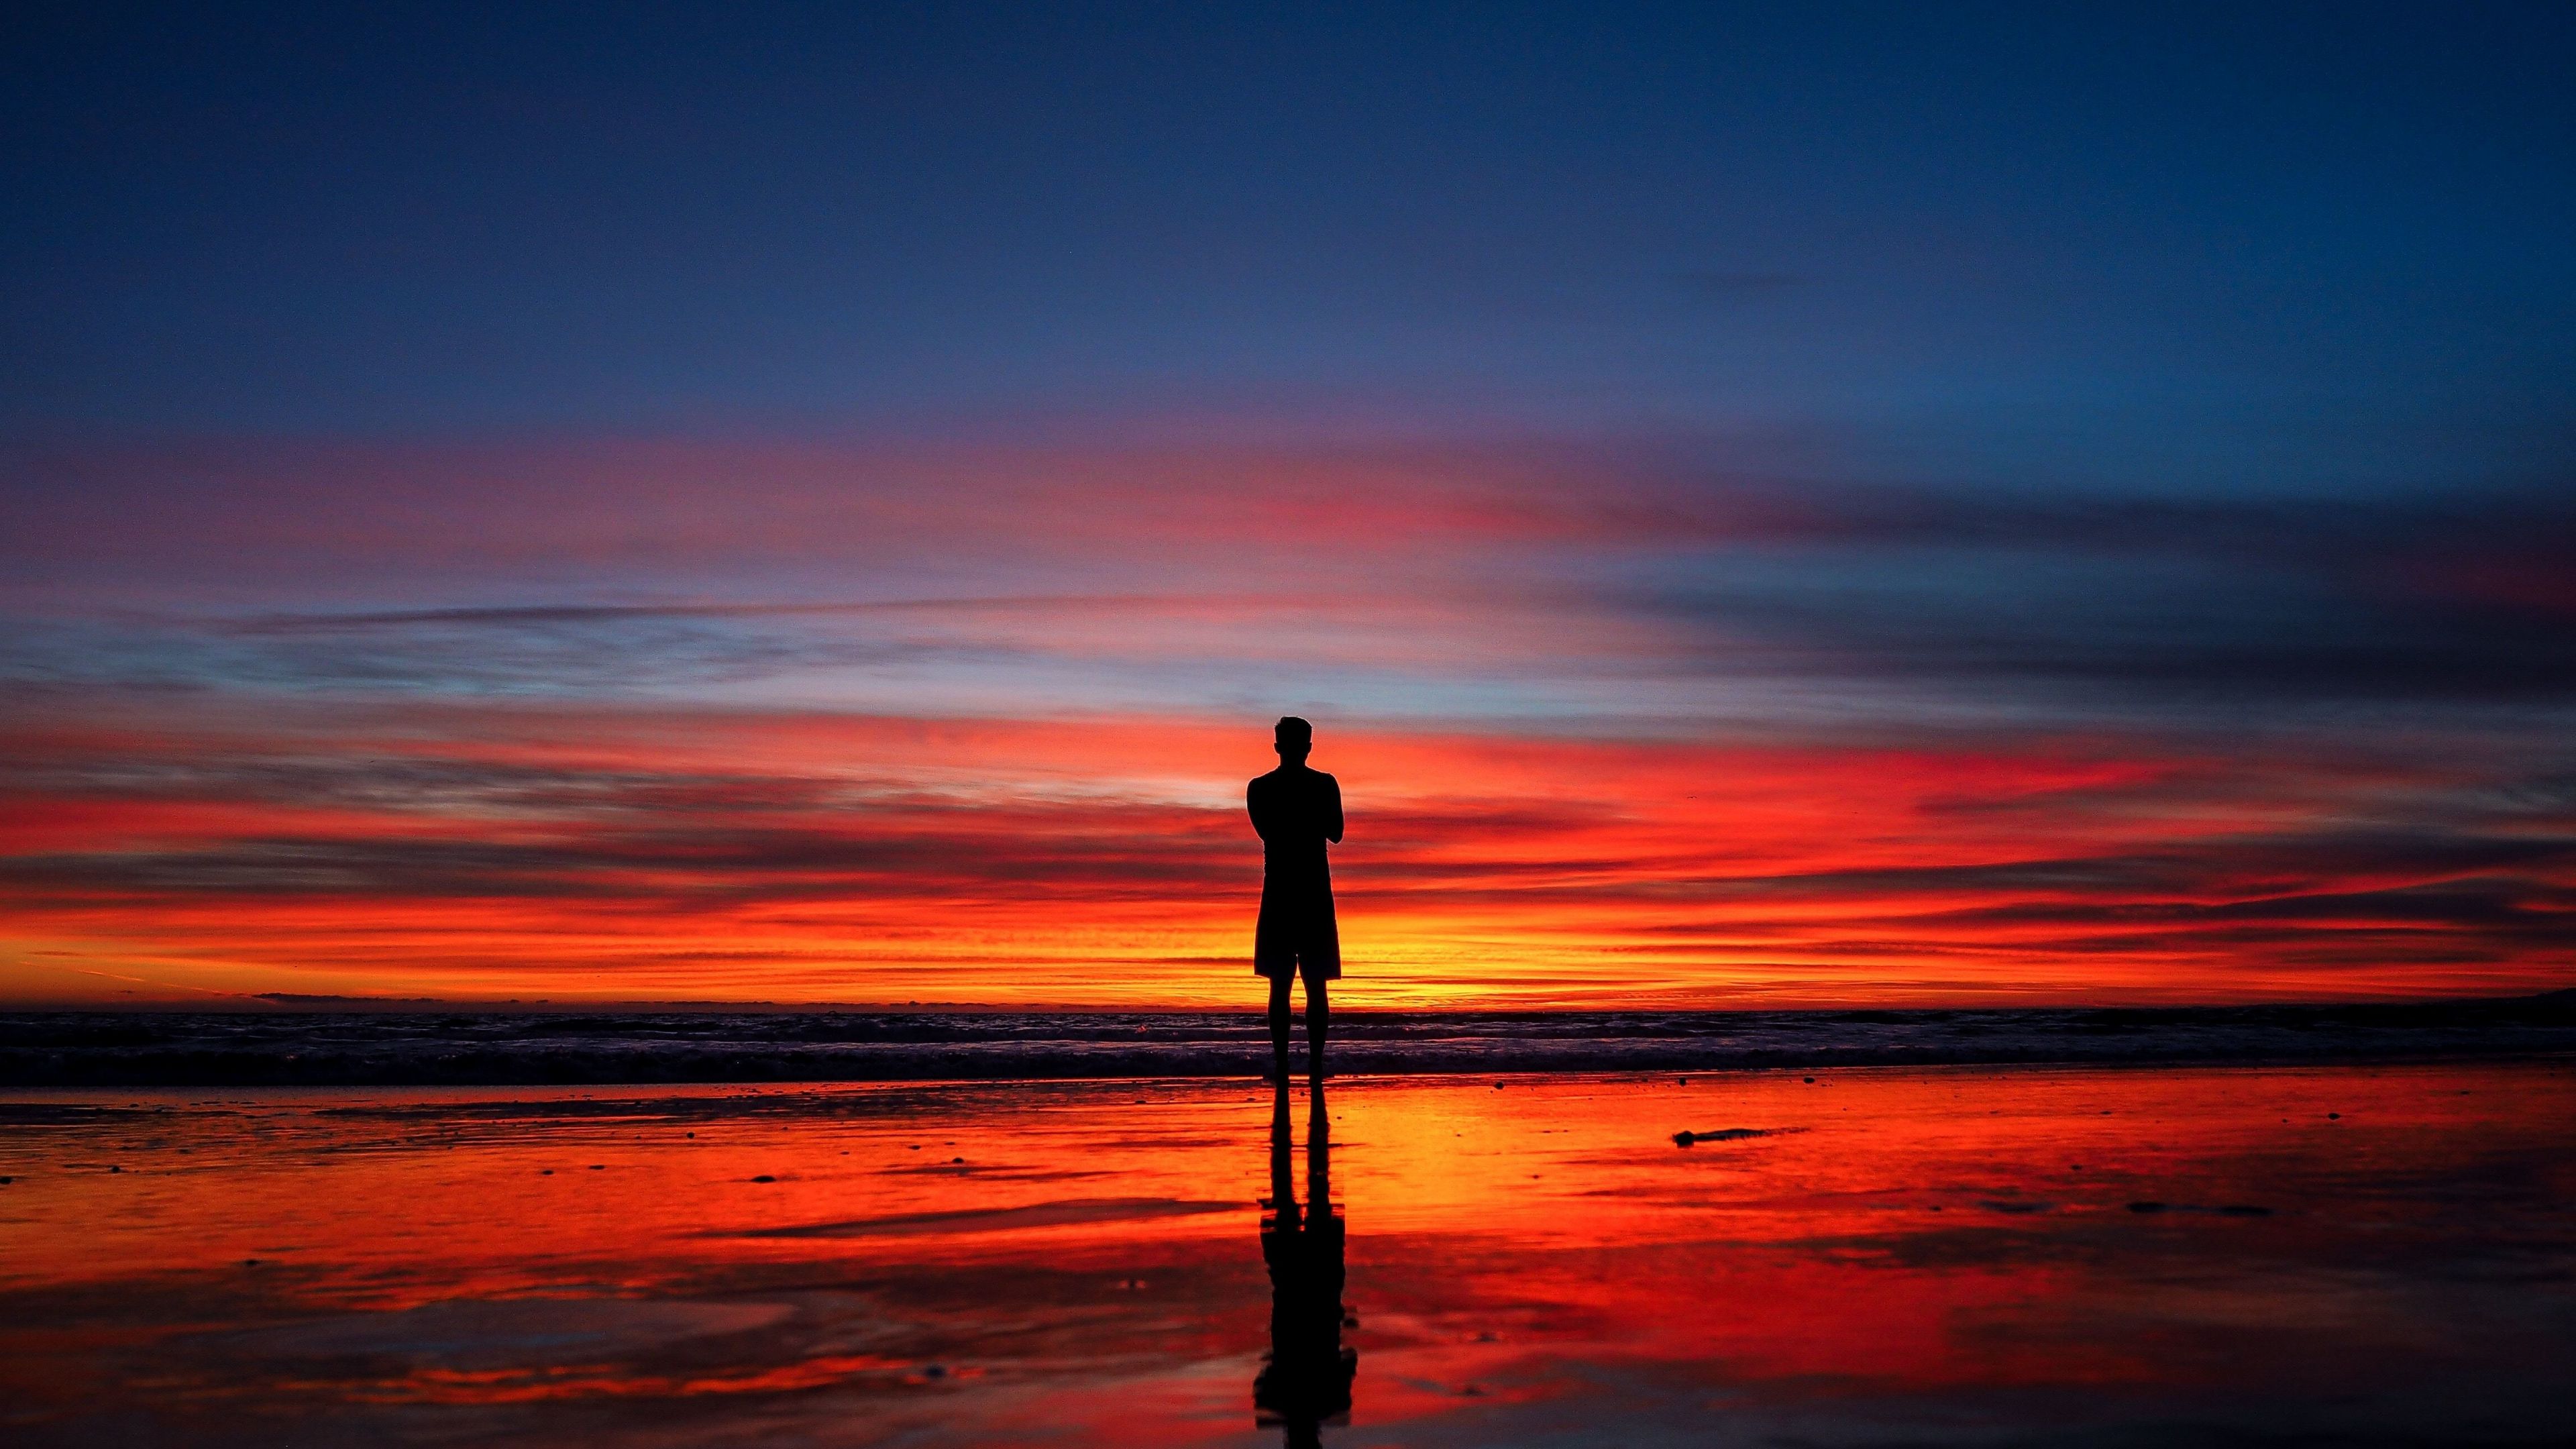 Download 3840x2160 wallpaper calm, peace, silhouette, reflections, man and sunset, 4k, uhd 16: widescreen, 3840x2160 HD image, background, 15930